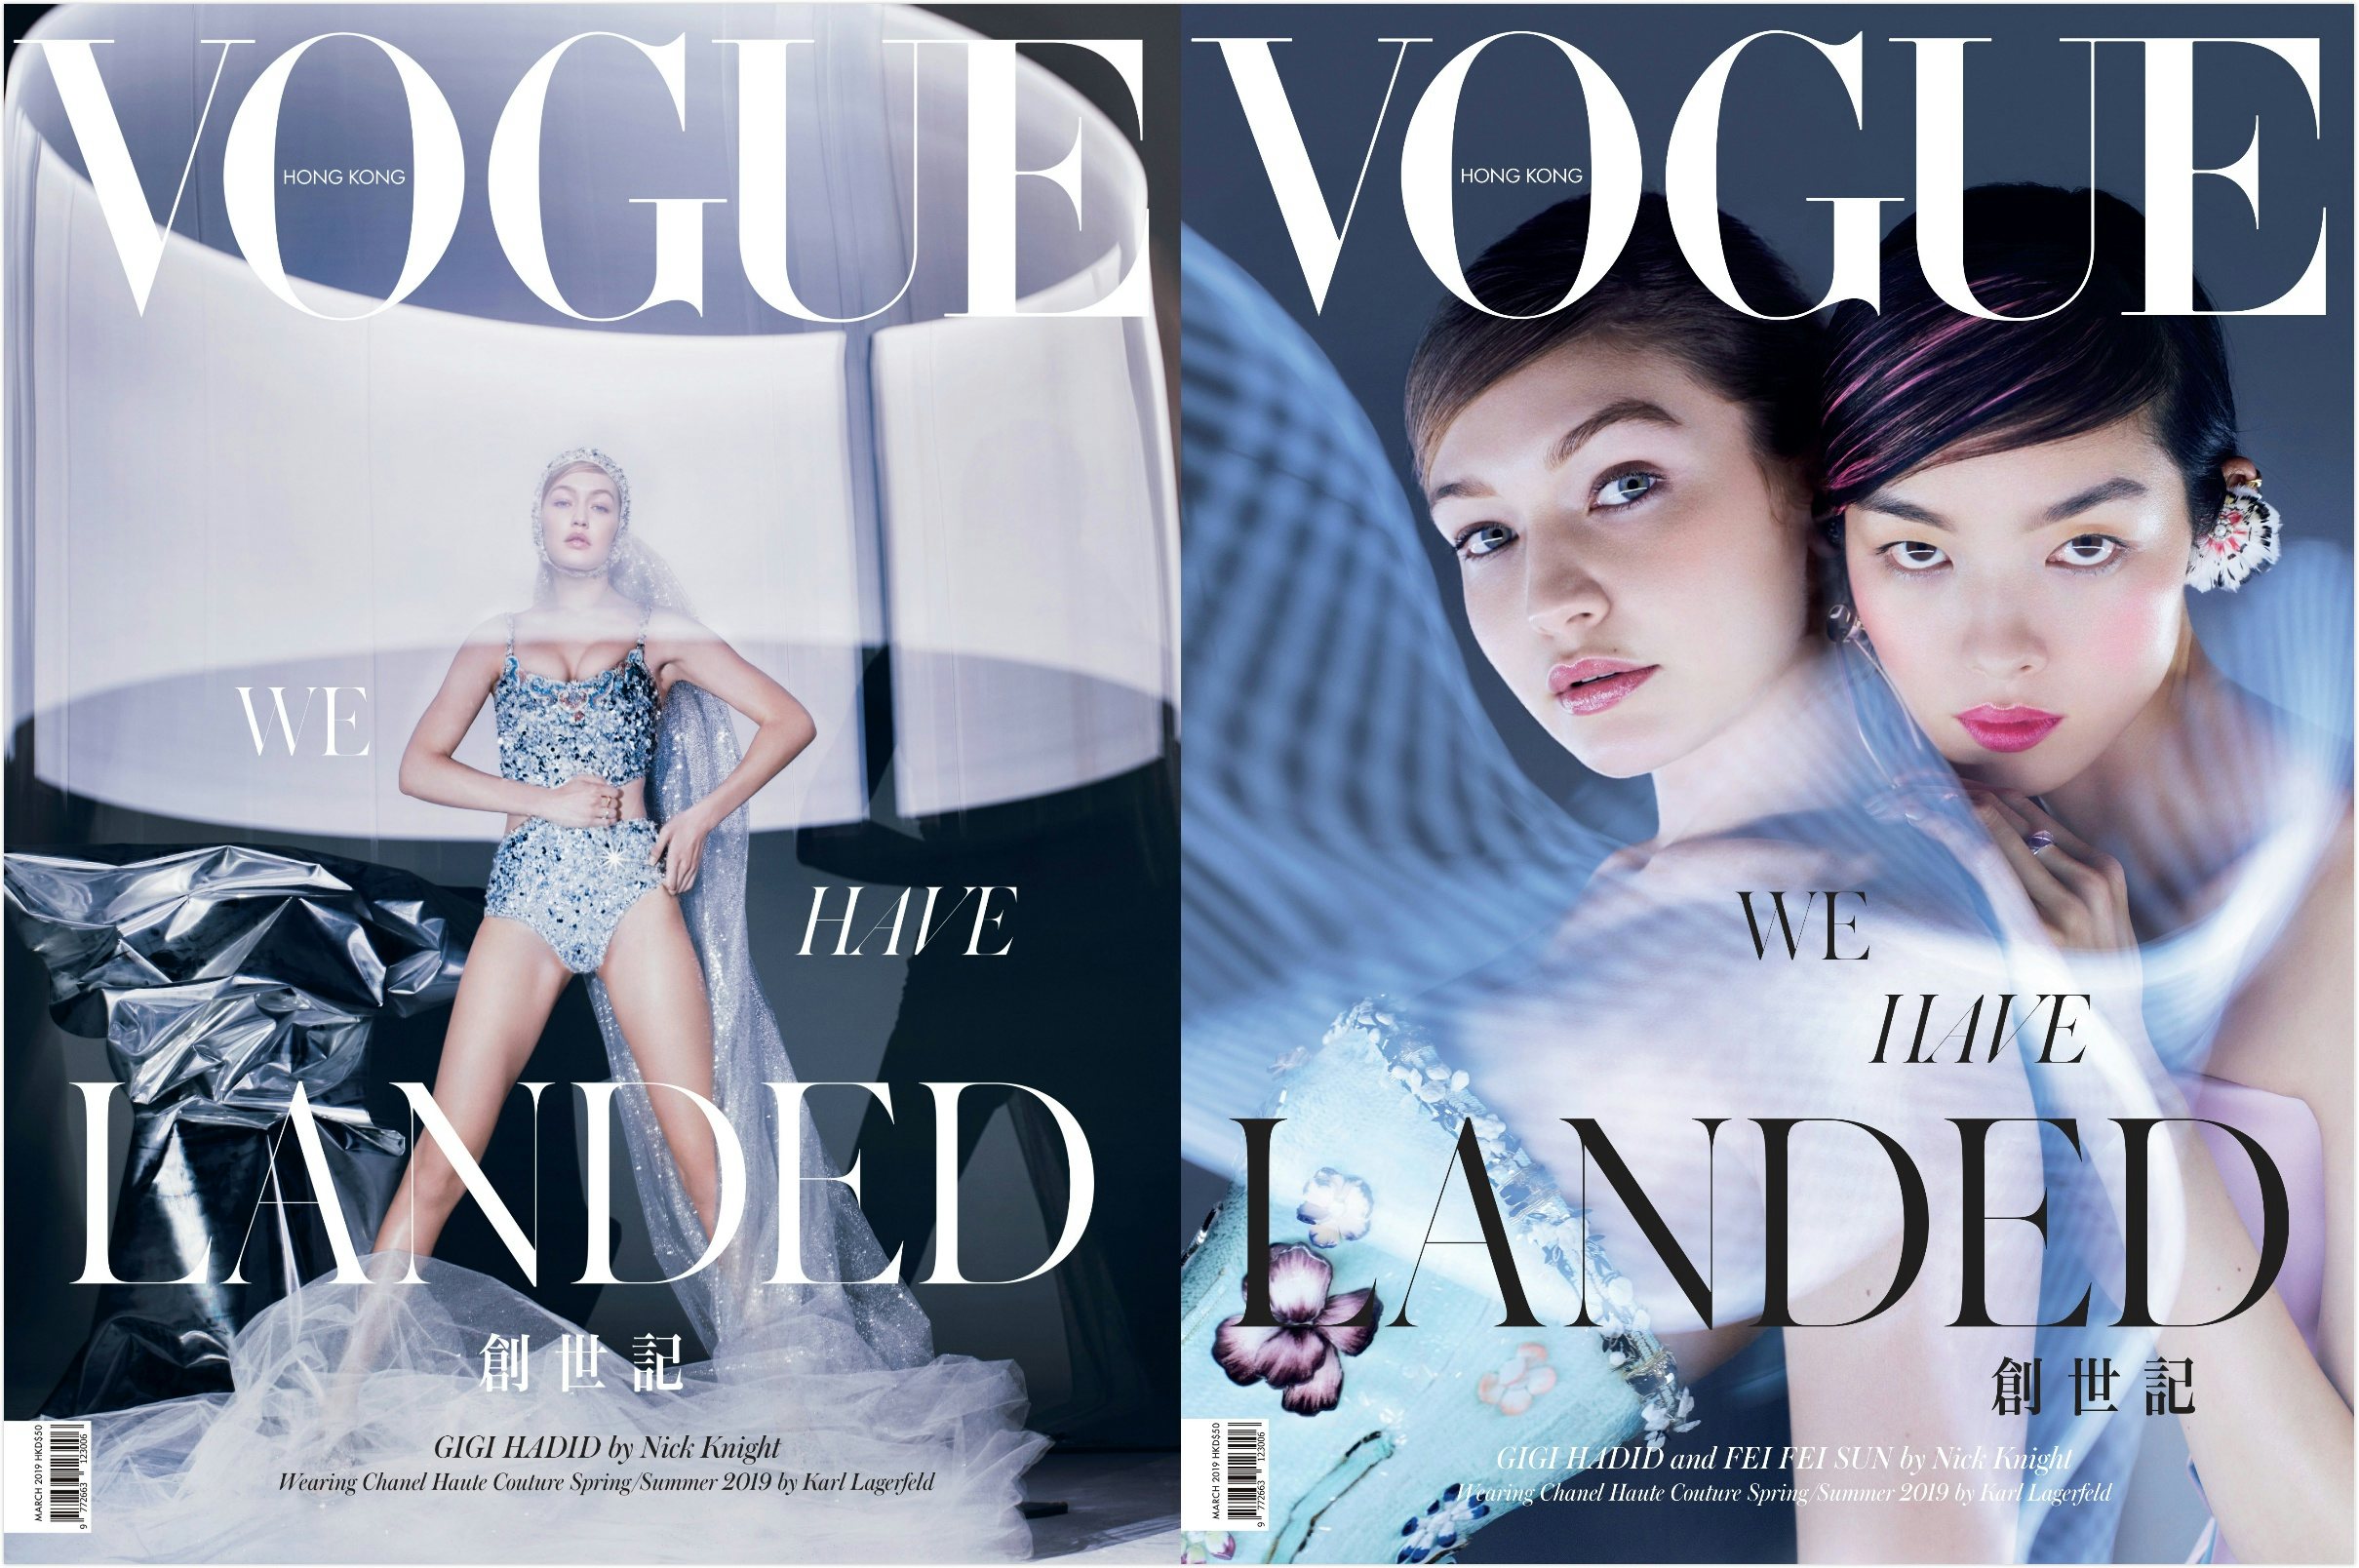 The worldwide acclaimed fashion publisher Condé Nast International will debut Vogue Hong Kong on March 3, featuring models Gigi Hadid and Sun Feifei. Courtesy image